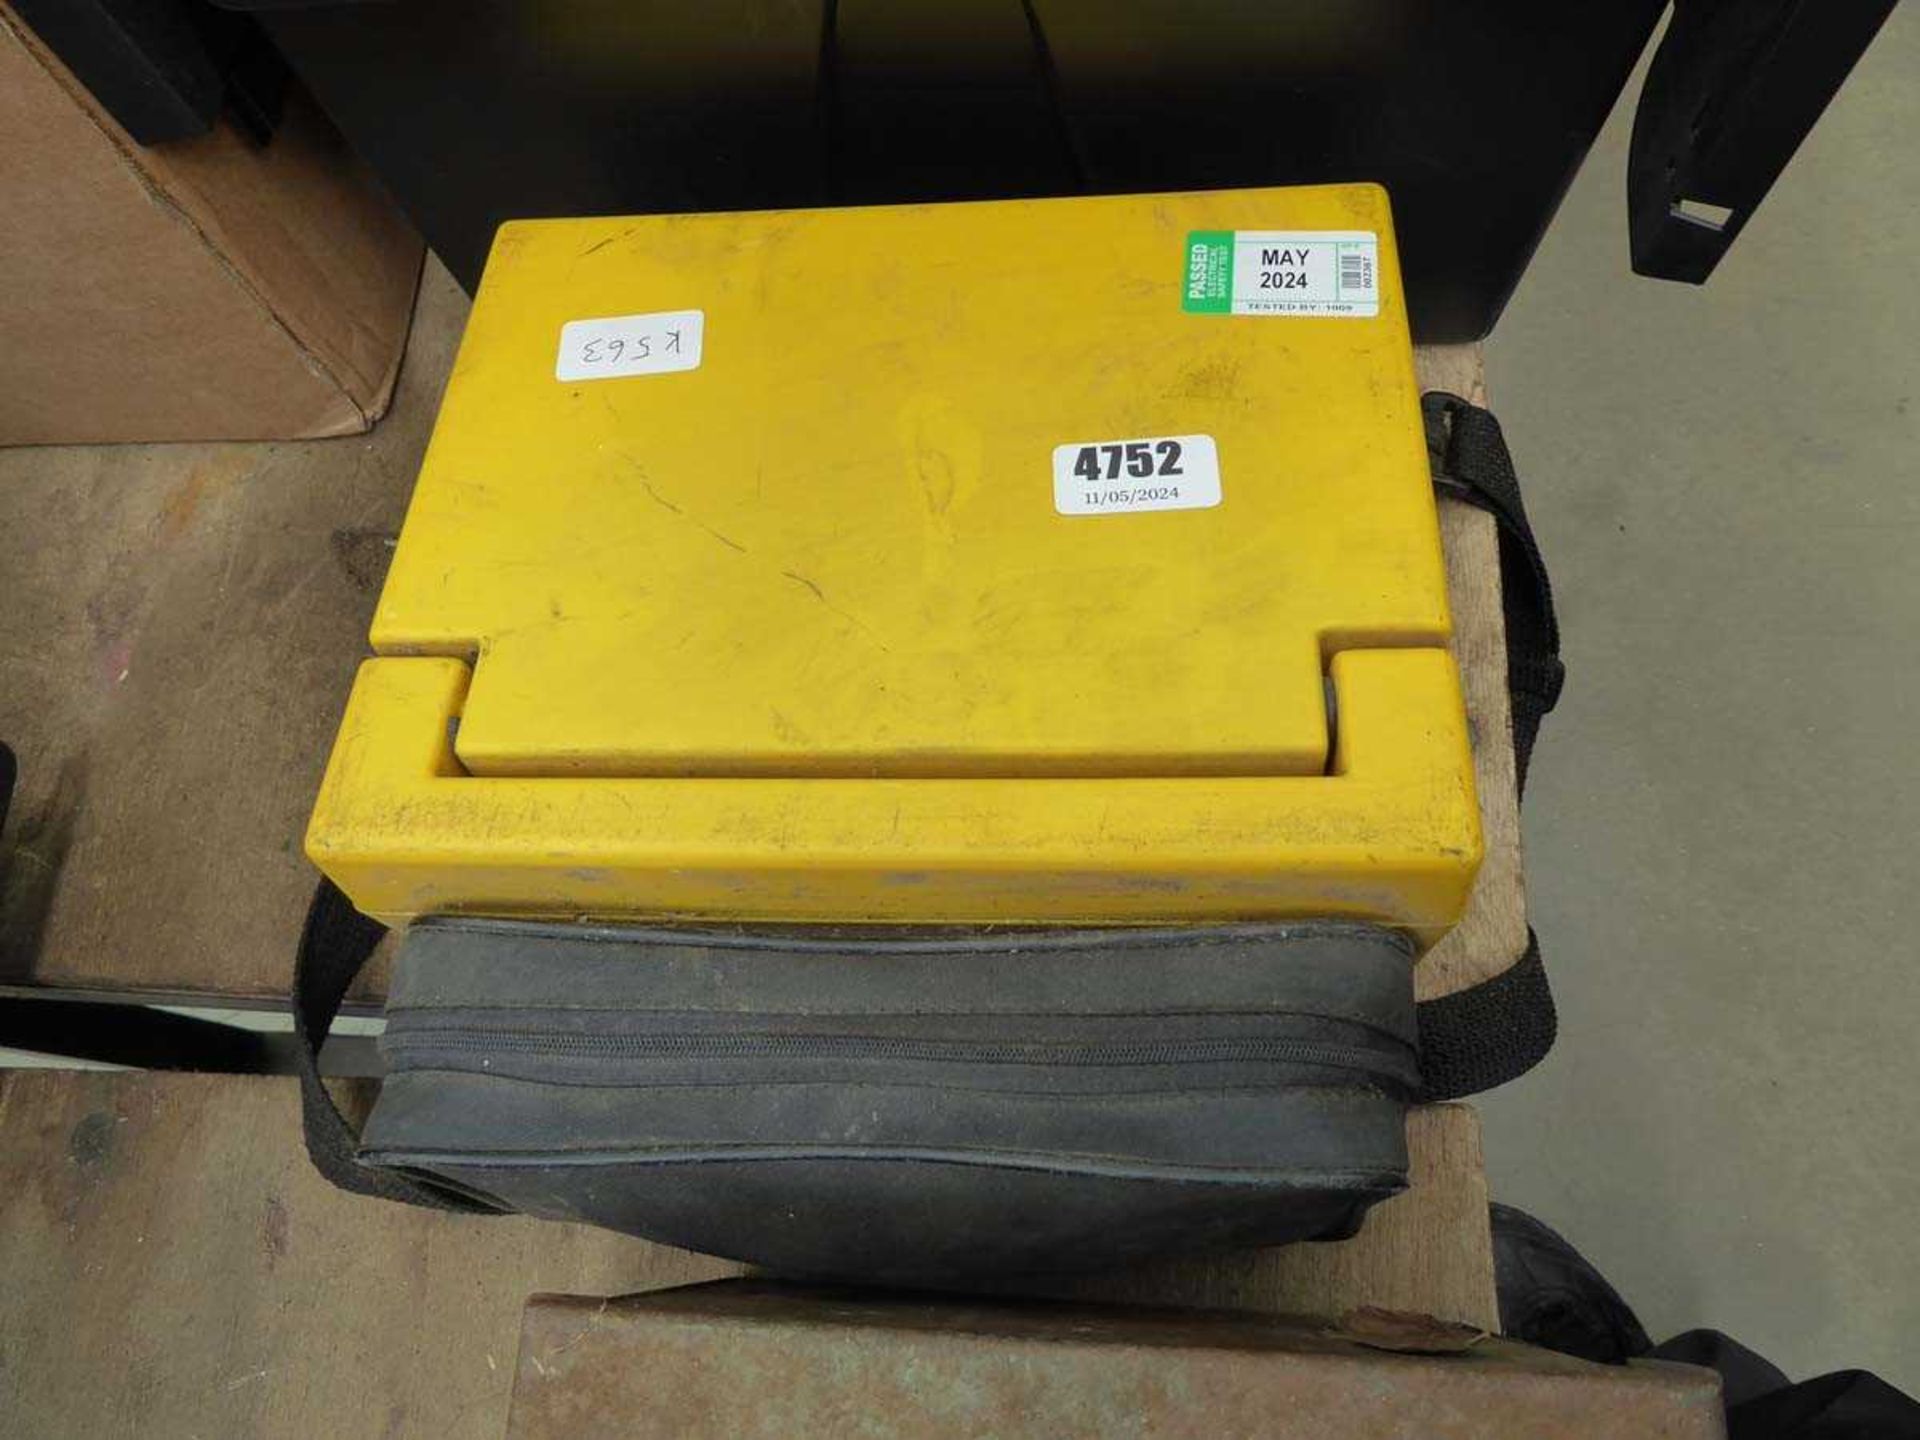 Pat testing machine and box containing pipe threader - Image 2 of 2